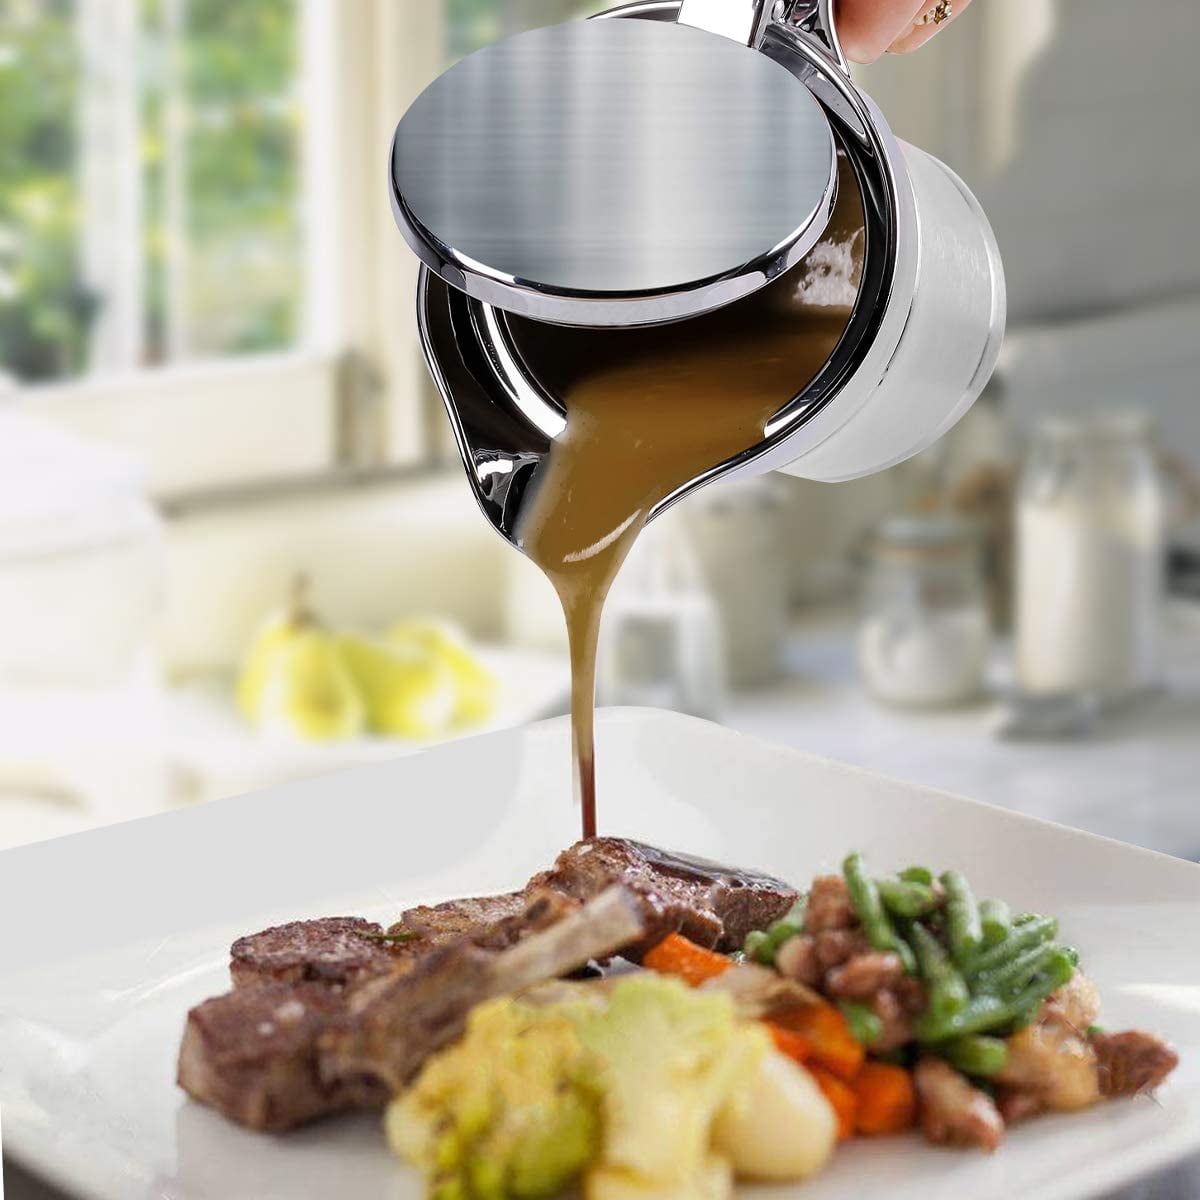 304 Stainless Steel Thermal Insulated Double Wall Sauce Pot Serving Jug for Home Kitchen Rehomy Gravy Boat Sauce Jug with Lid 